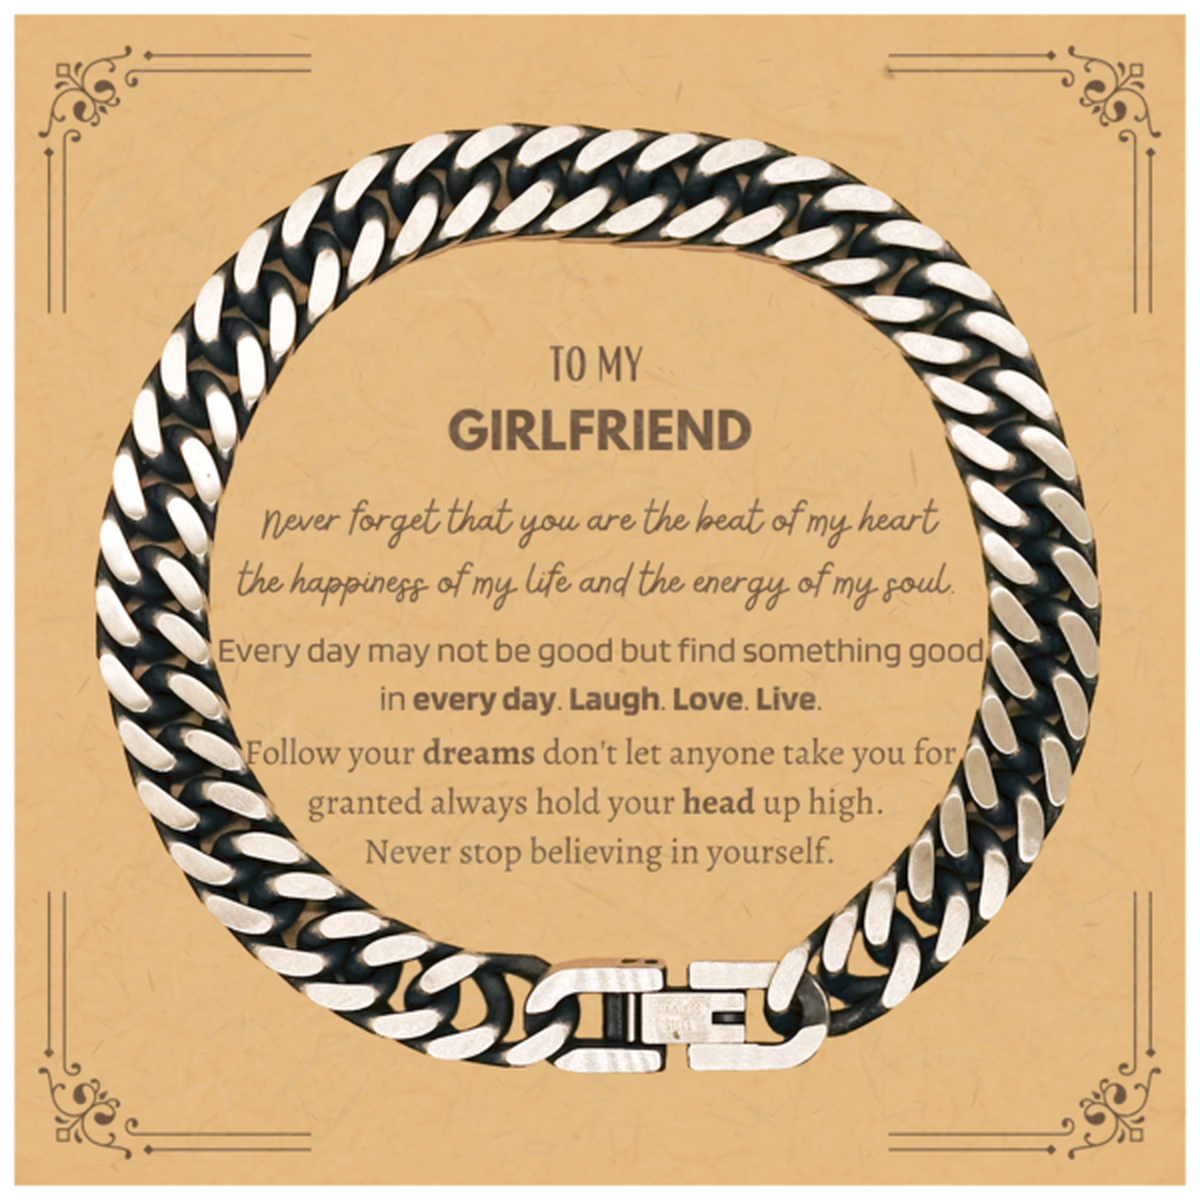 To My Girlfriend Message Card Gifts, Christmas Girlfriend Cuban Link Chain Bracelet Present, Birthday Unique Motivational For Girlfriend, To My Girlfriend Never forget that you are the beat of my heart the happiness of my life and the energy of my soul